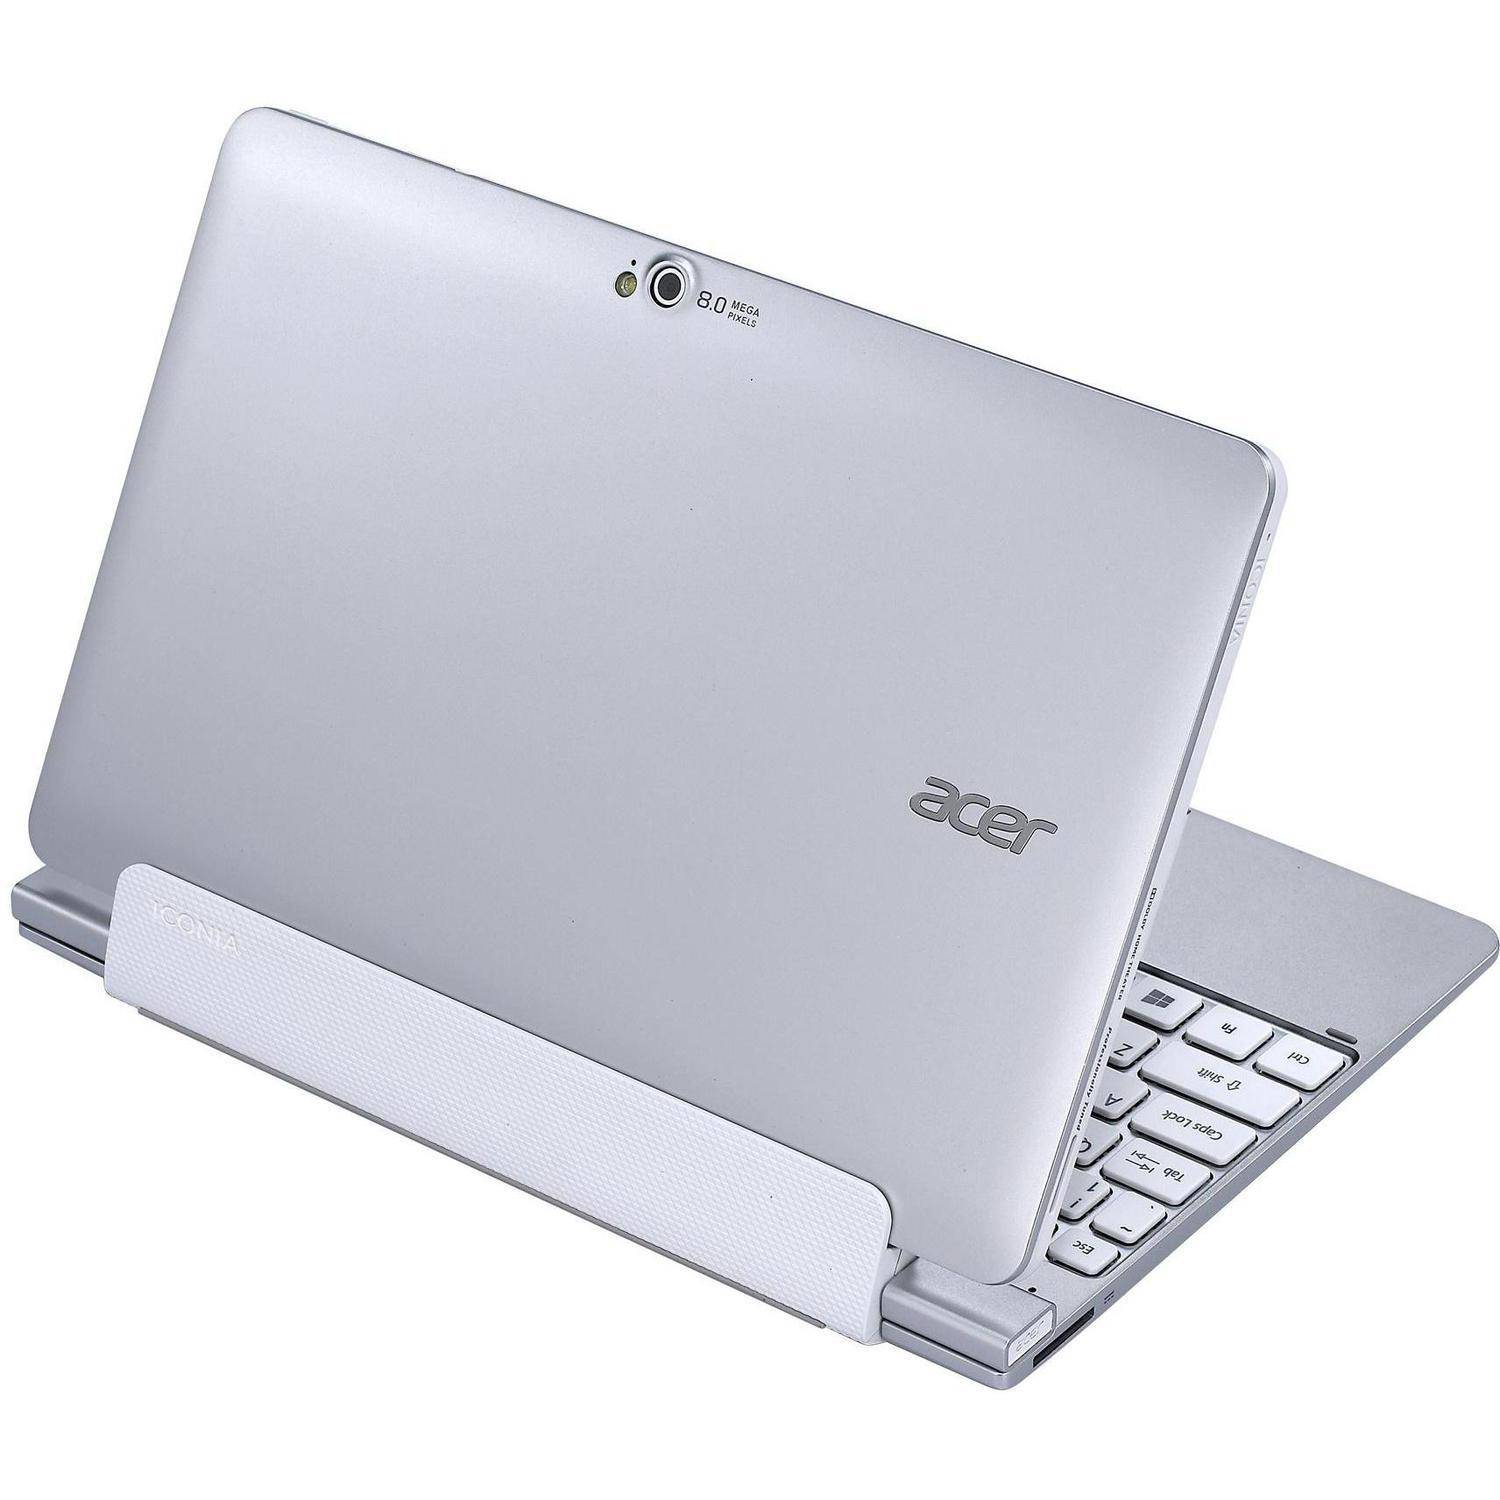 Acer White 10.1" ICONIA W510-1849 2-in-1 Convertible PC with Intel Atom Dual-Core Z2760 Processor, 2GB Memory, 32GB Hard Drive and Windows 8 - image 4 of 9